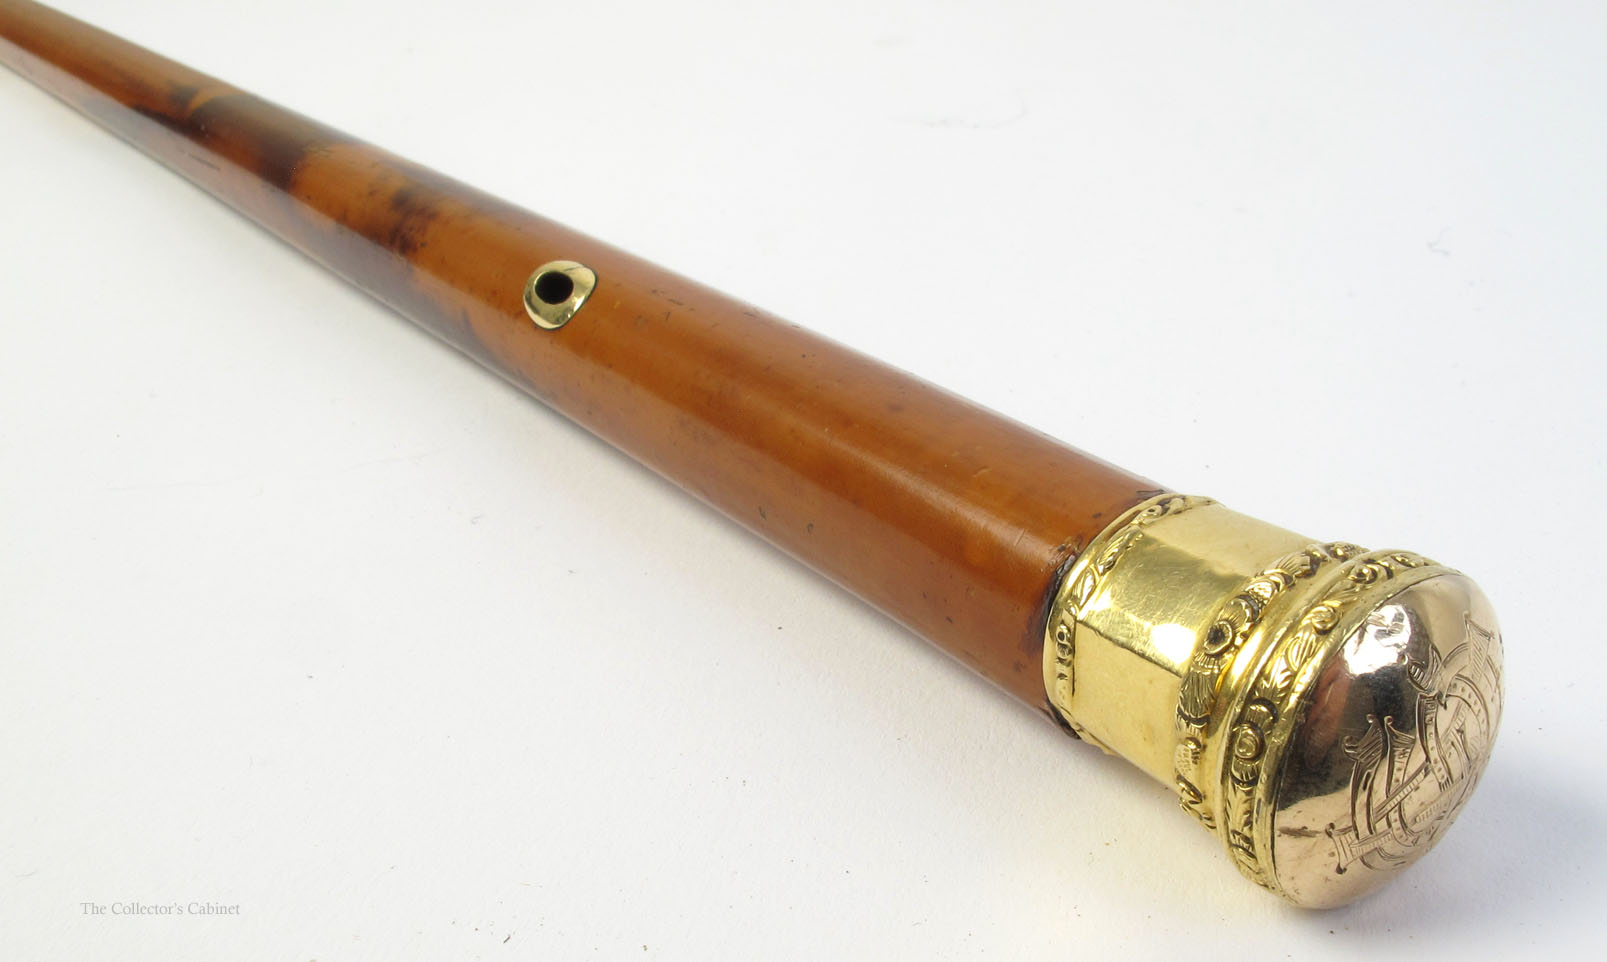 A 19th century gold mounted malacca cane.